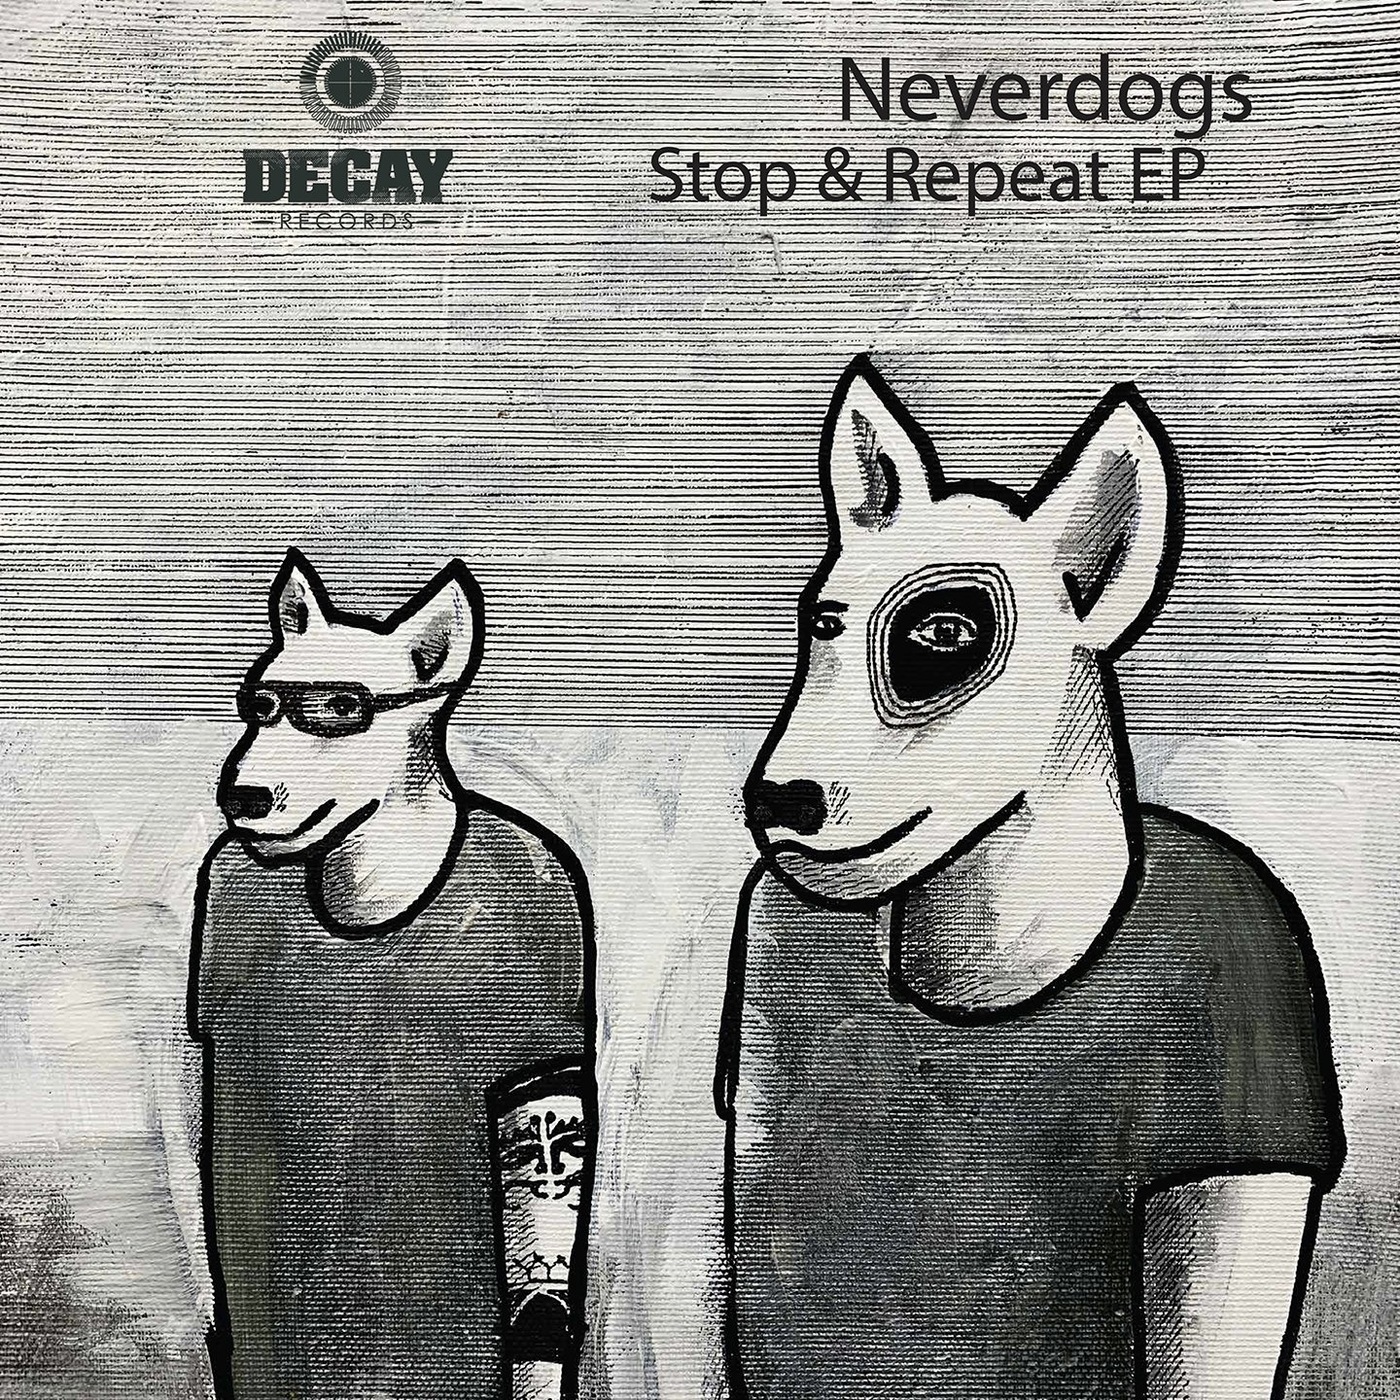 image cover: Neverdogs - Stop & Repeat - EP /